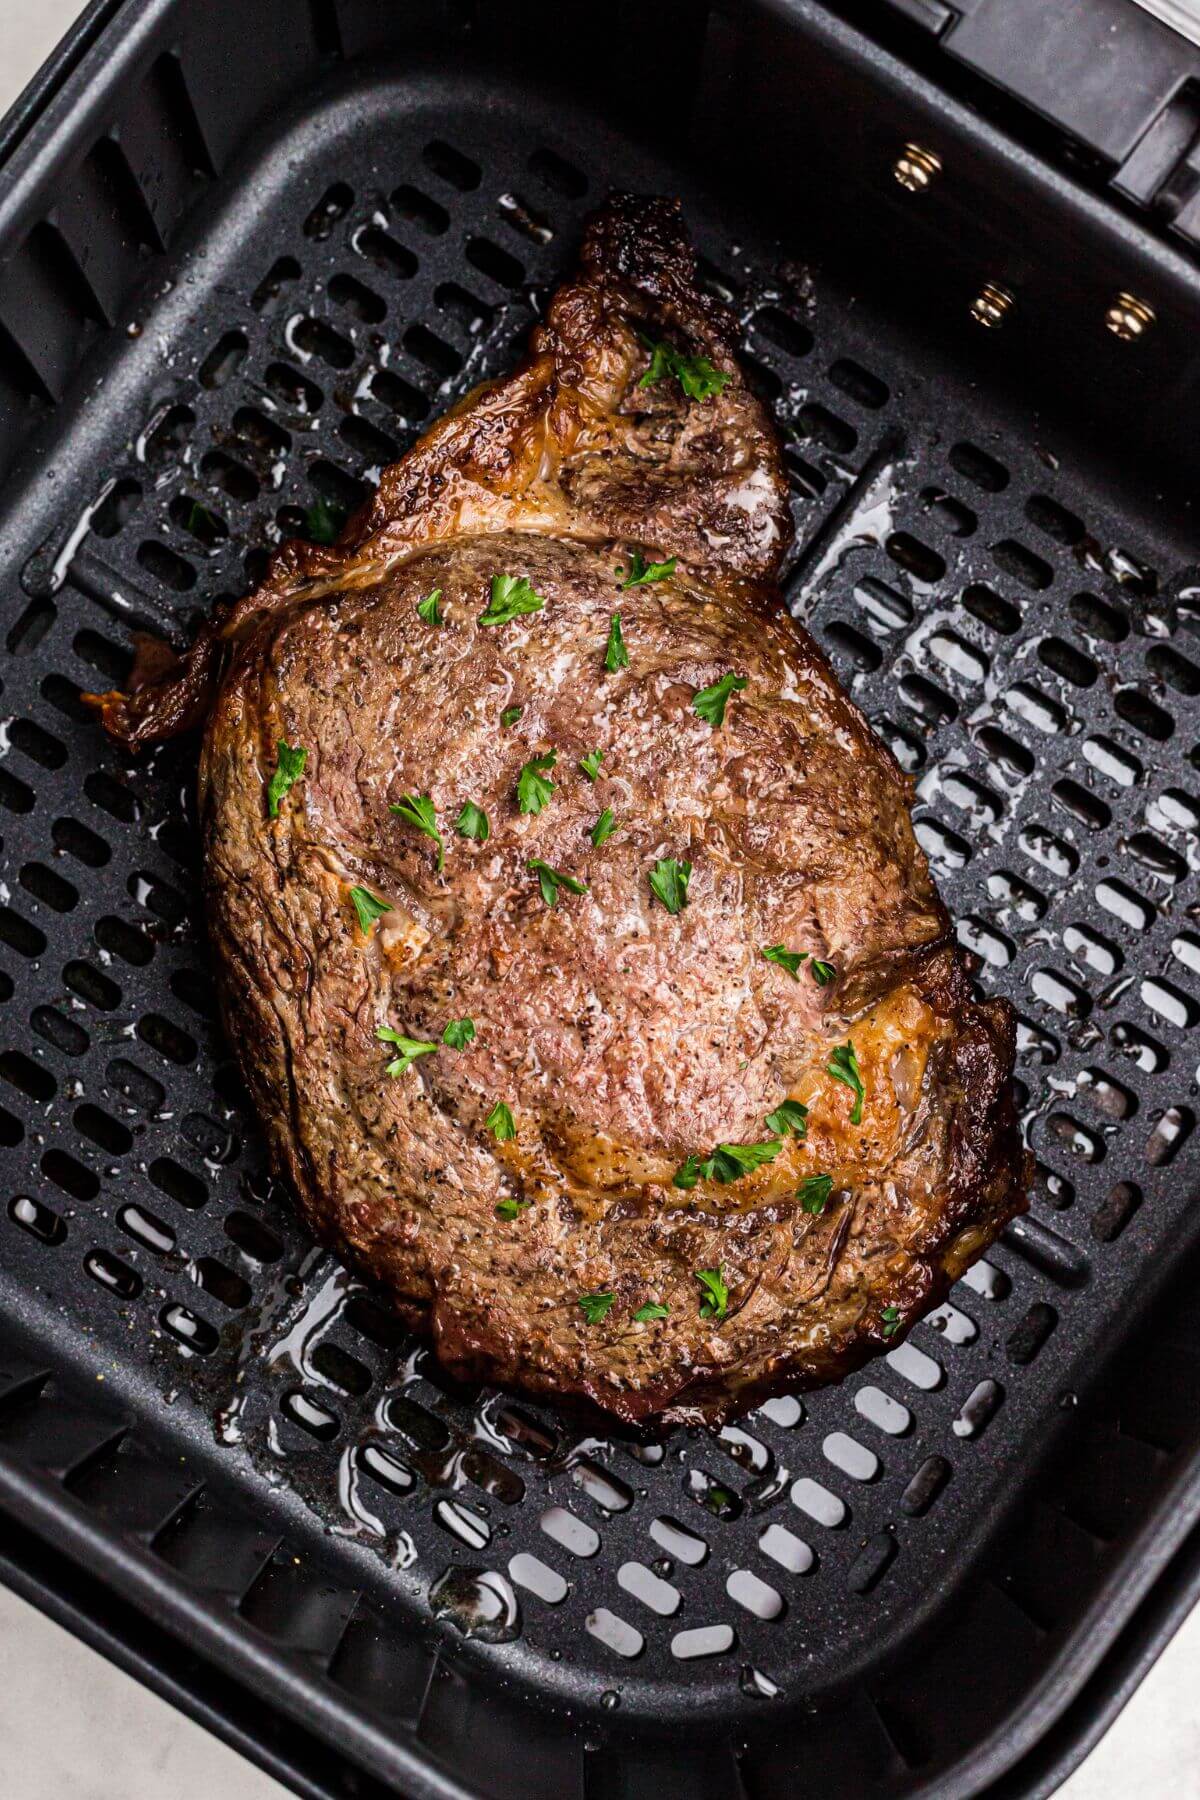 Juicy marbled steak in the air fryer basket garnished with parsley flakes. 